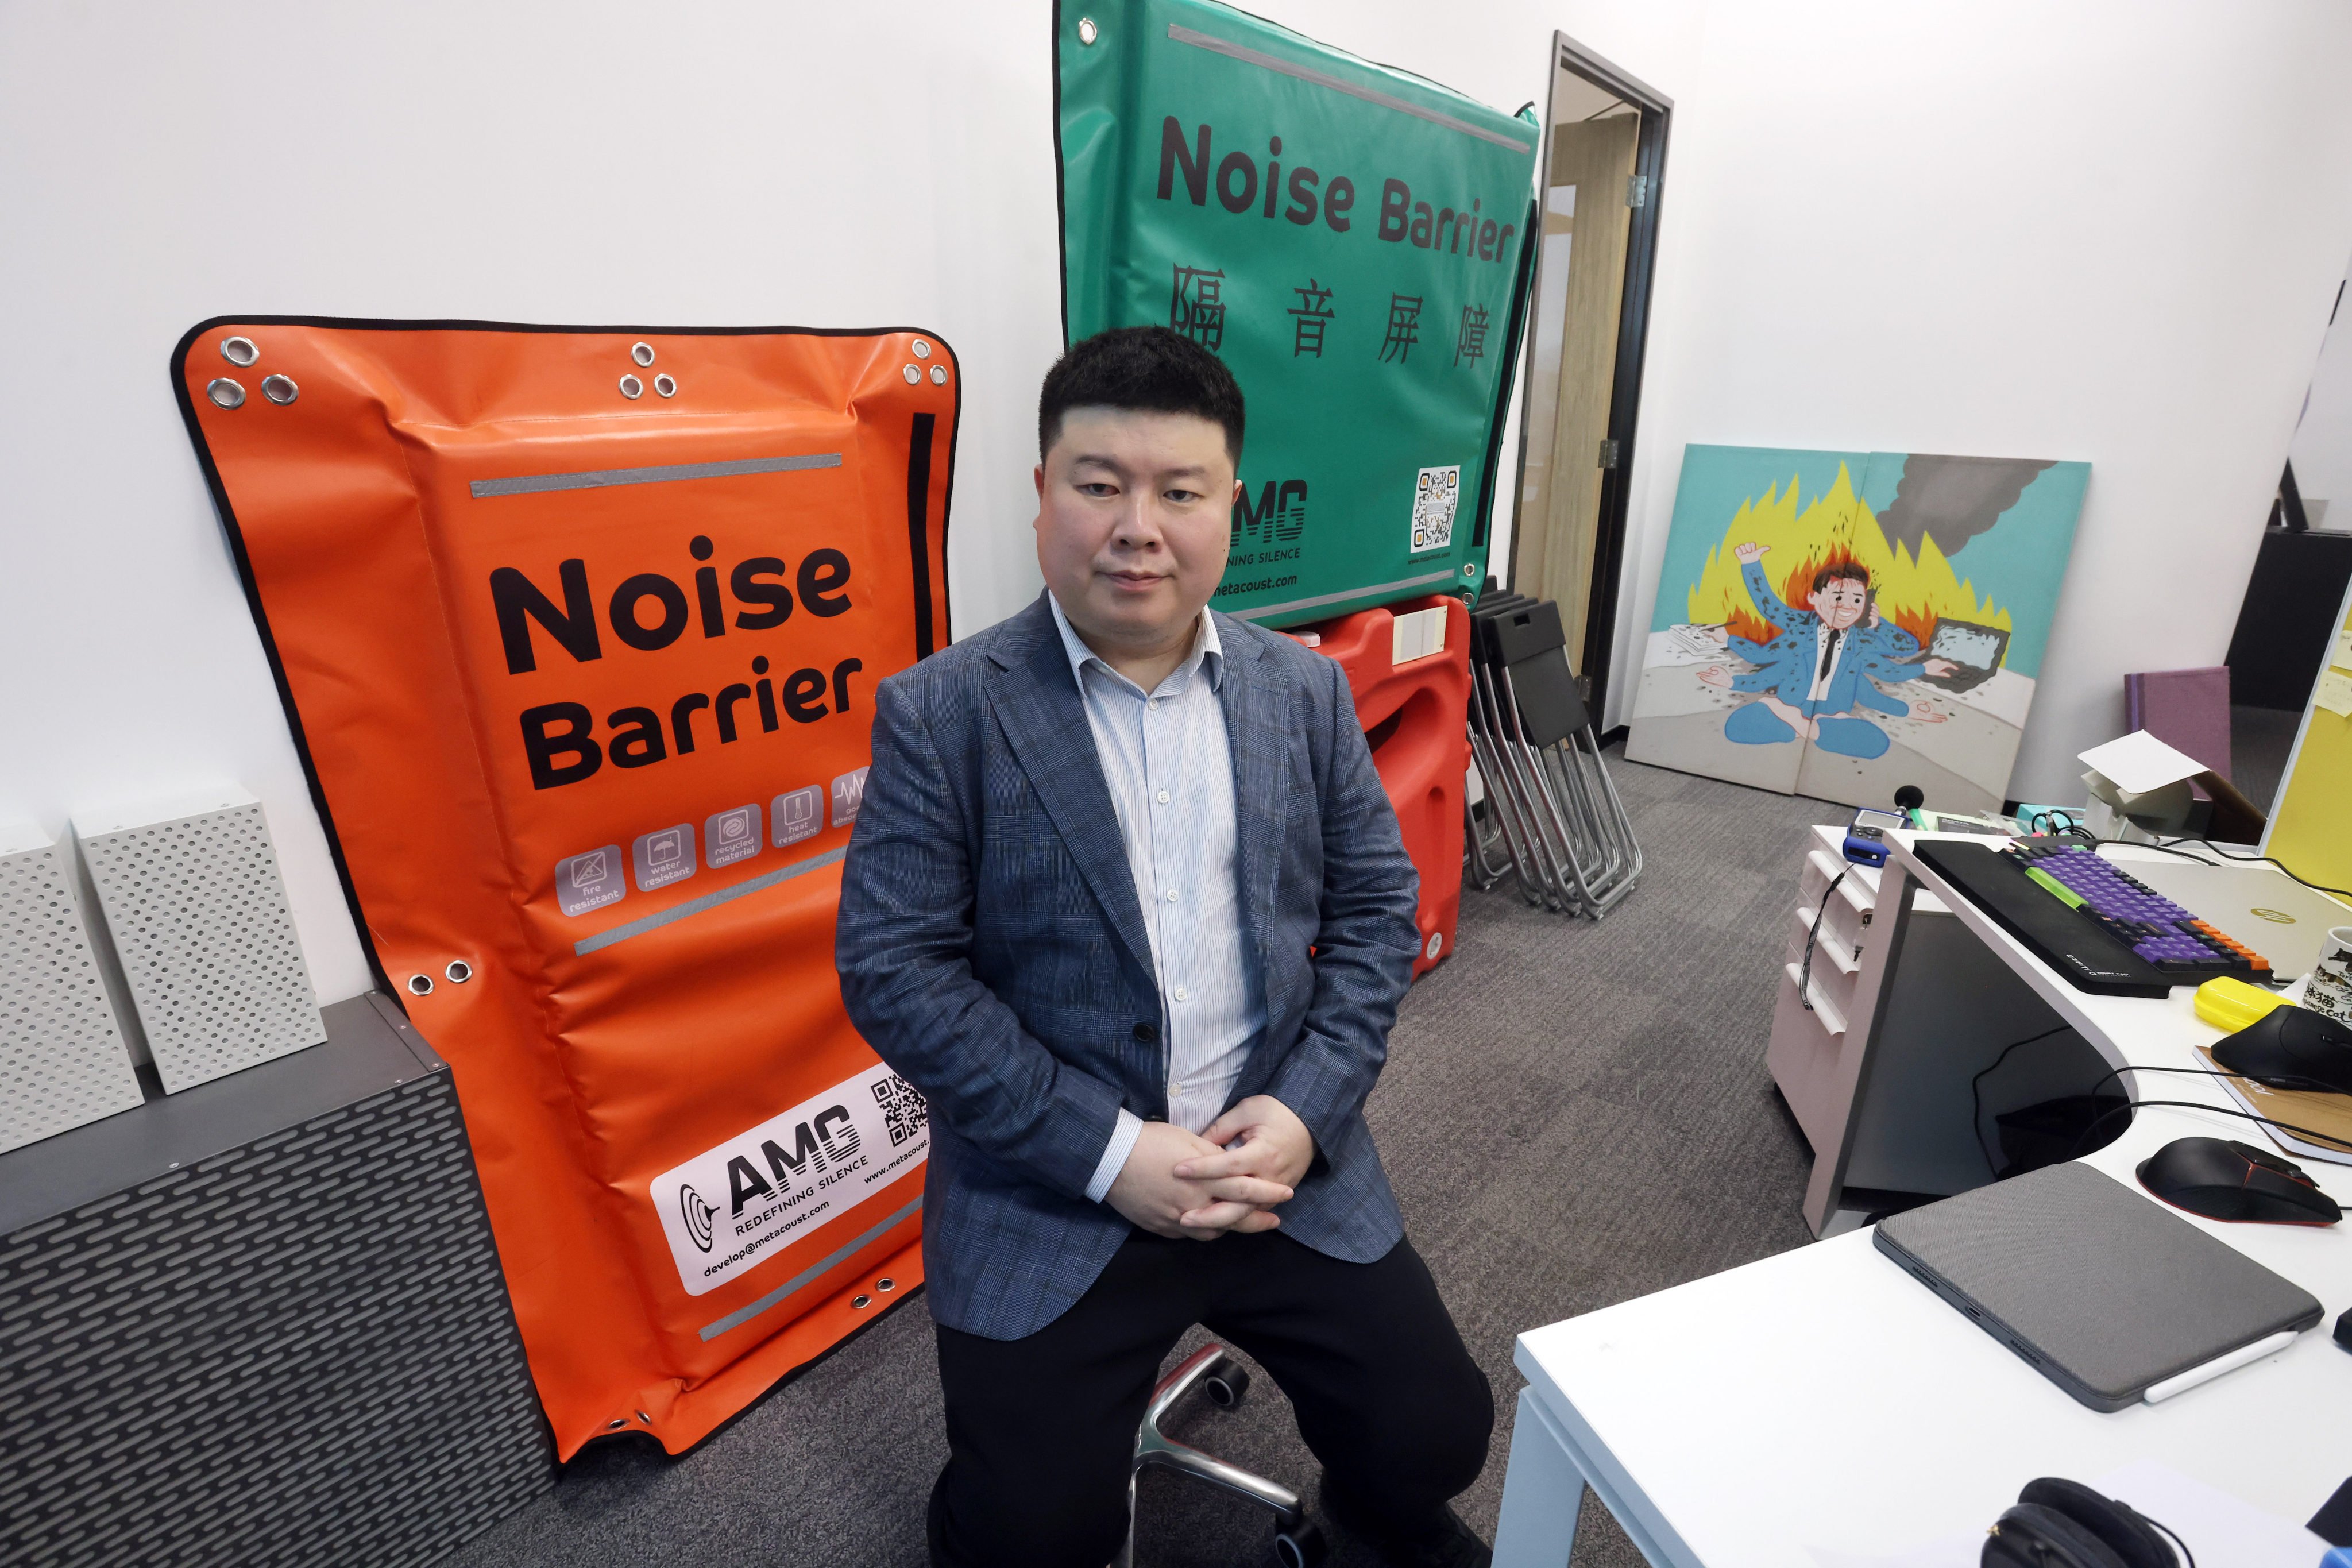 Acoustic Metamaterials Group founder Chen Shuyu says nearly all kinds of materials for acoustic purposes in buildings and in noise-cancelling barriers could be replaced by recycled plastic. Photo: Jonathan Wong